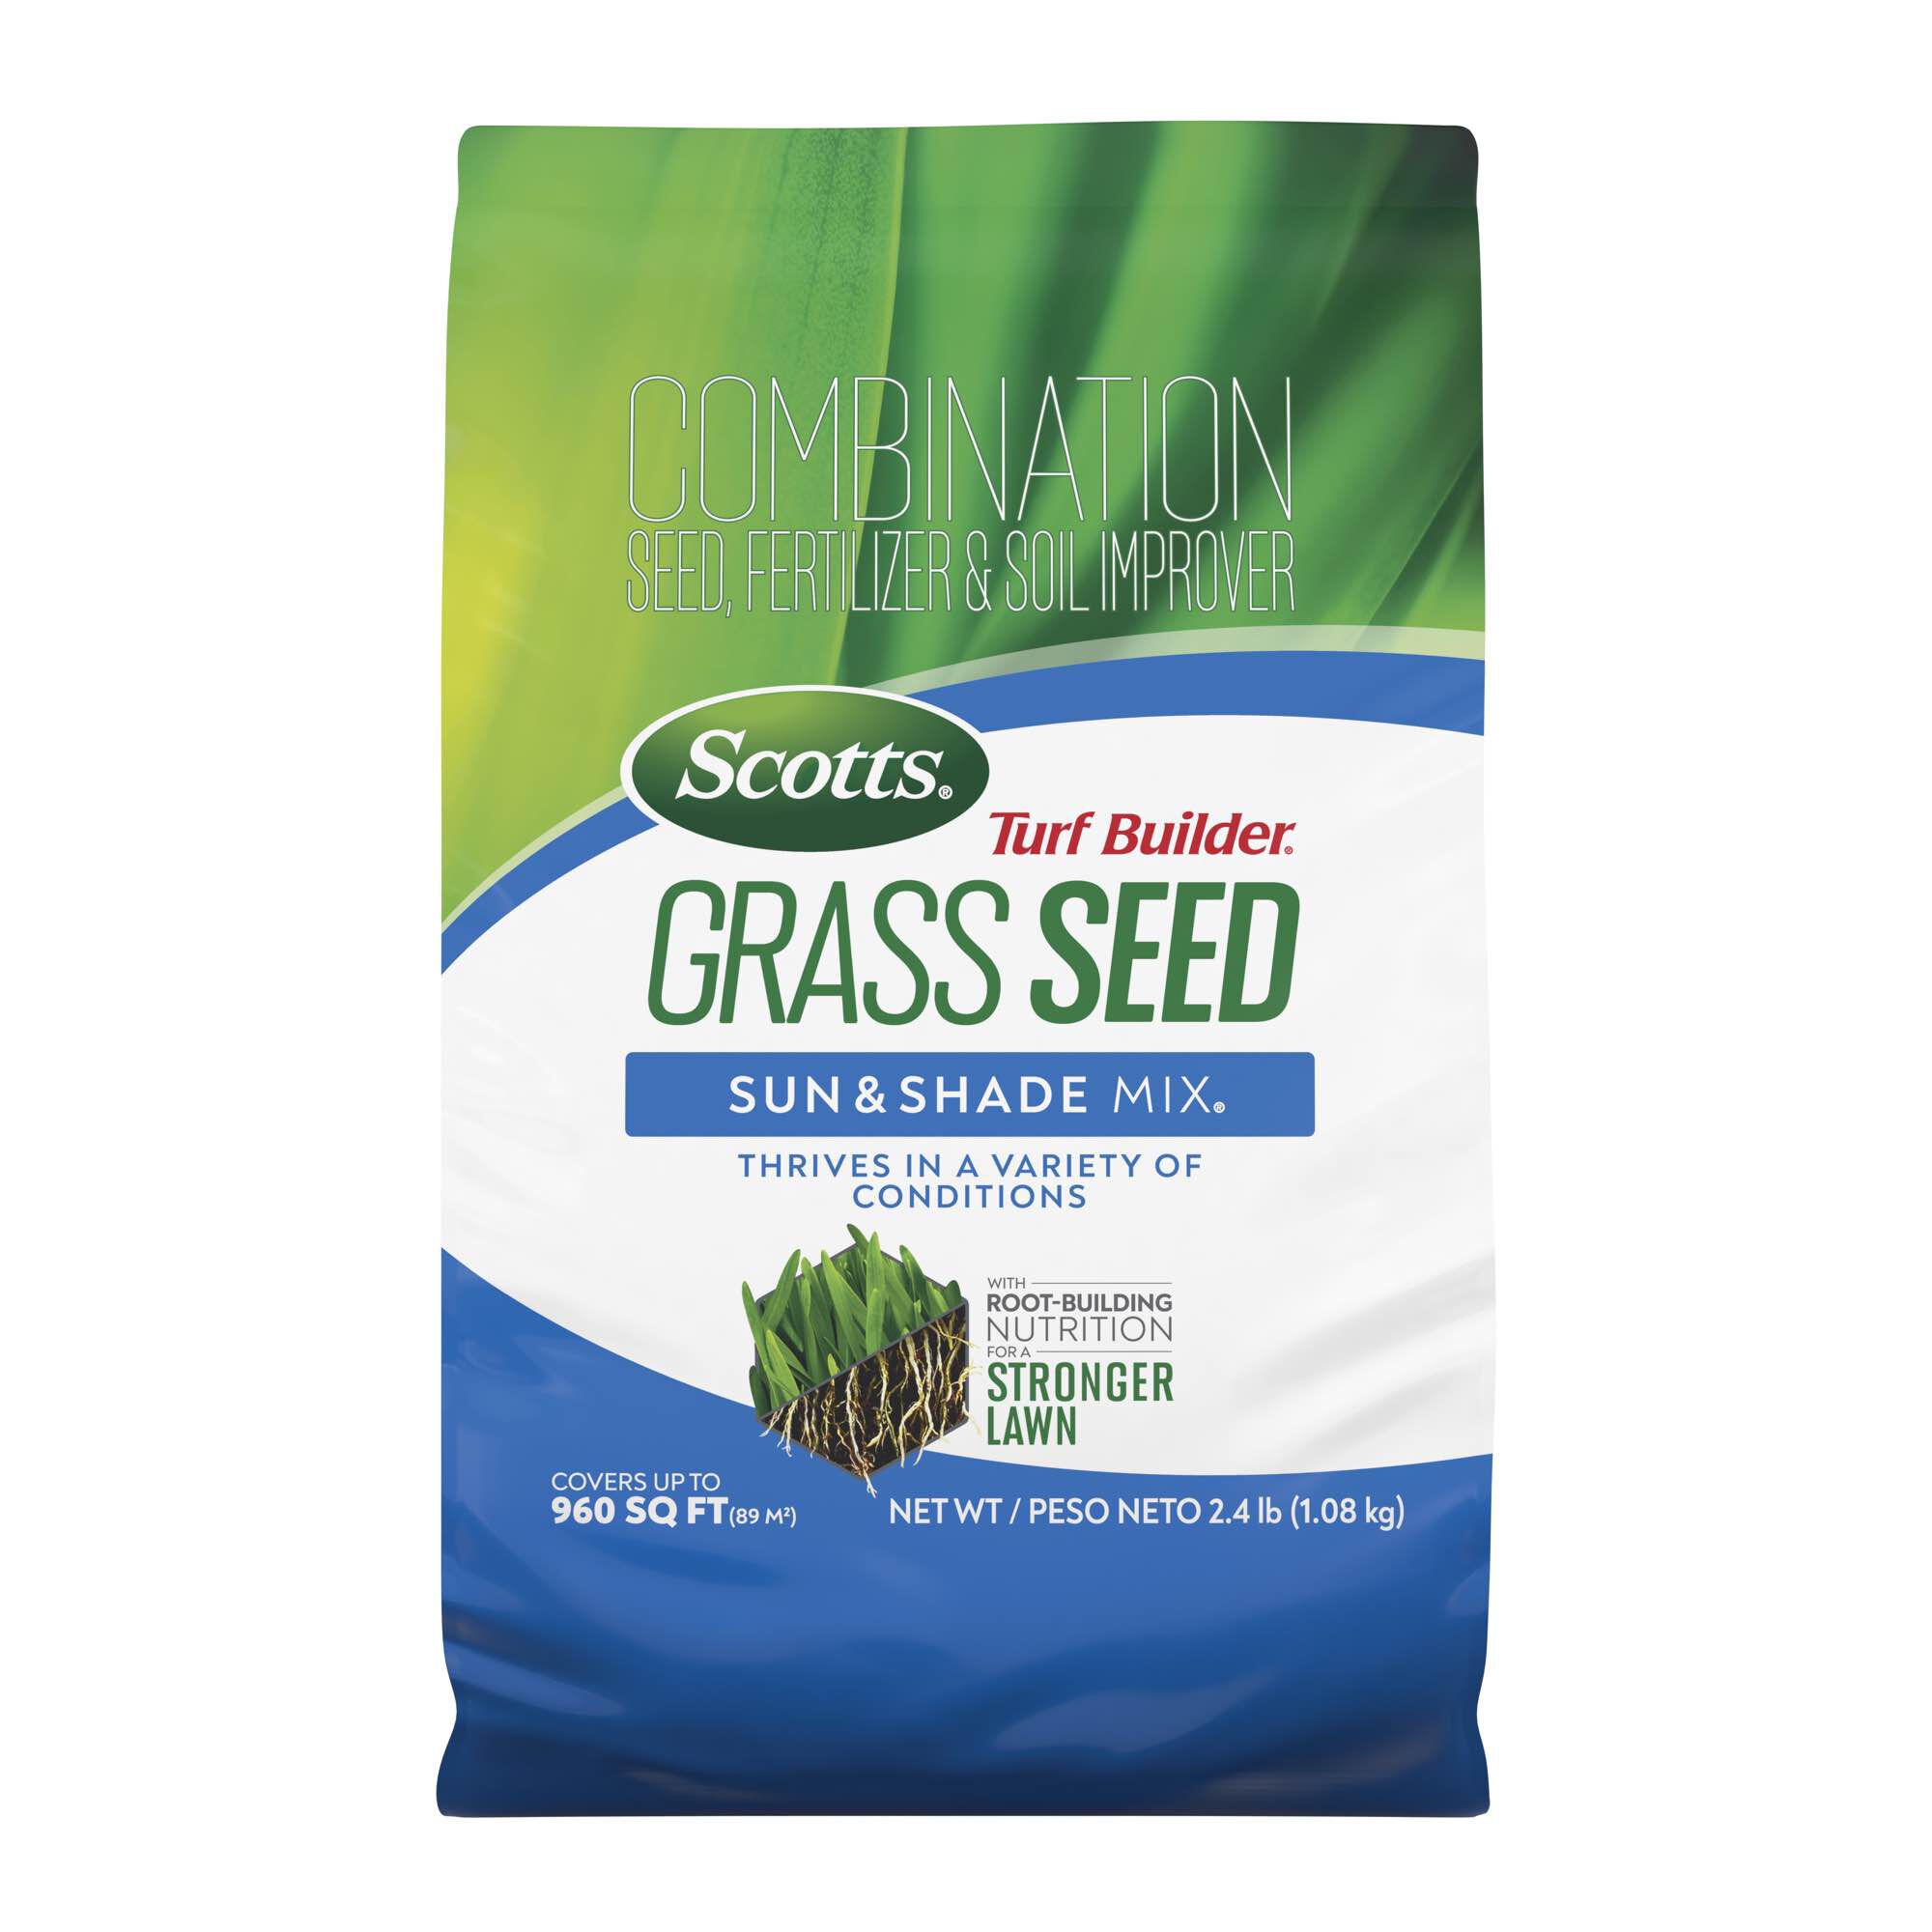 Image of Scotts Turf Builder Grass Seed image